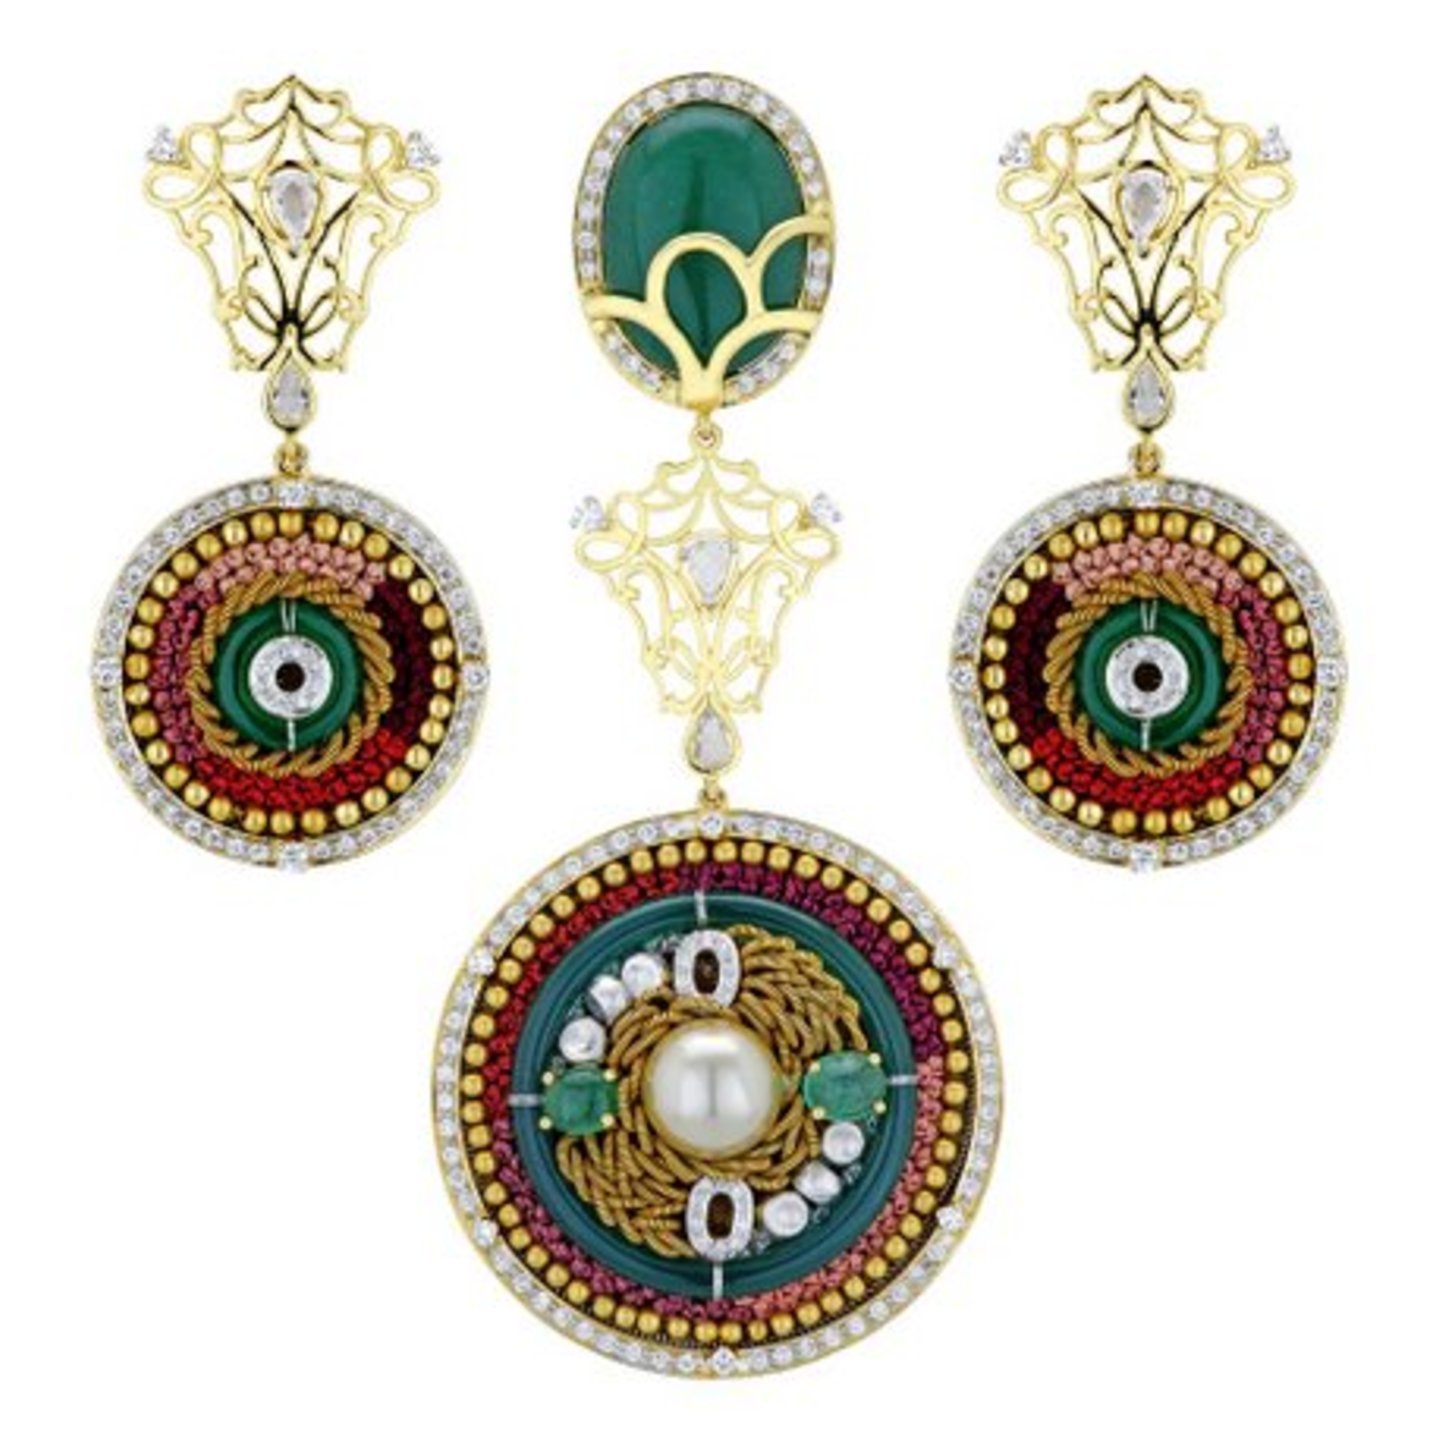 Opulent embroidery inspired traditional green red combination, pendant sets in gold ,embellished with diamonds and gemstones.